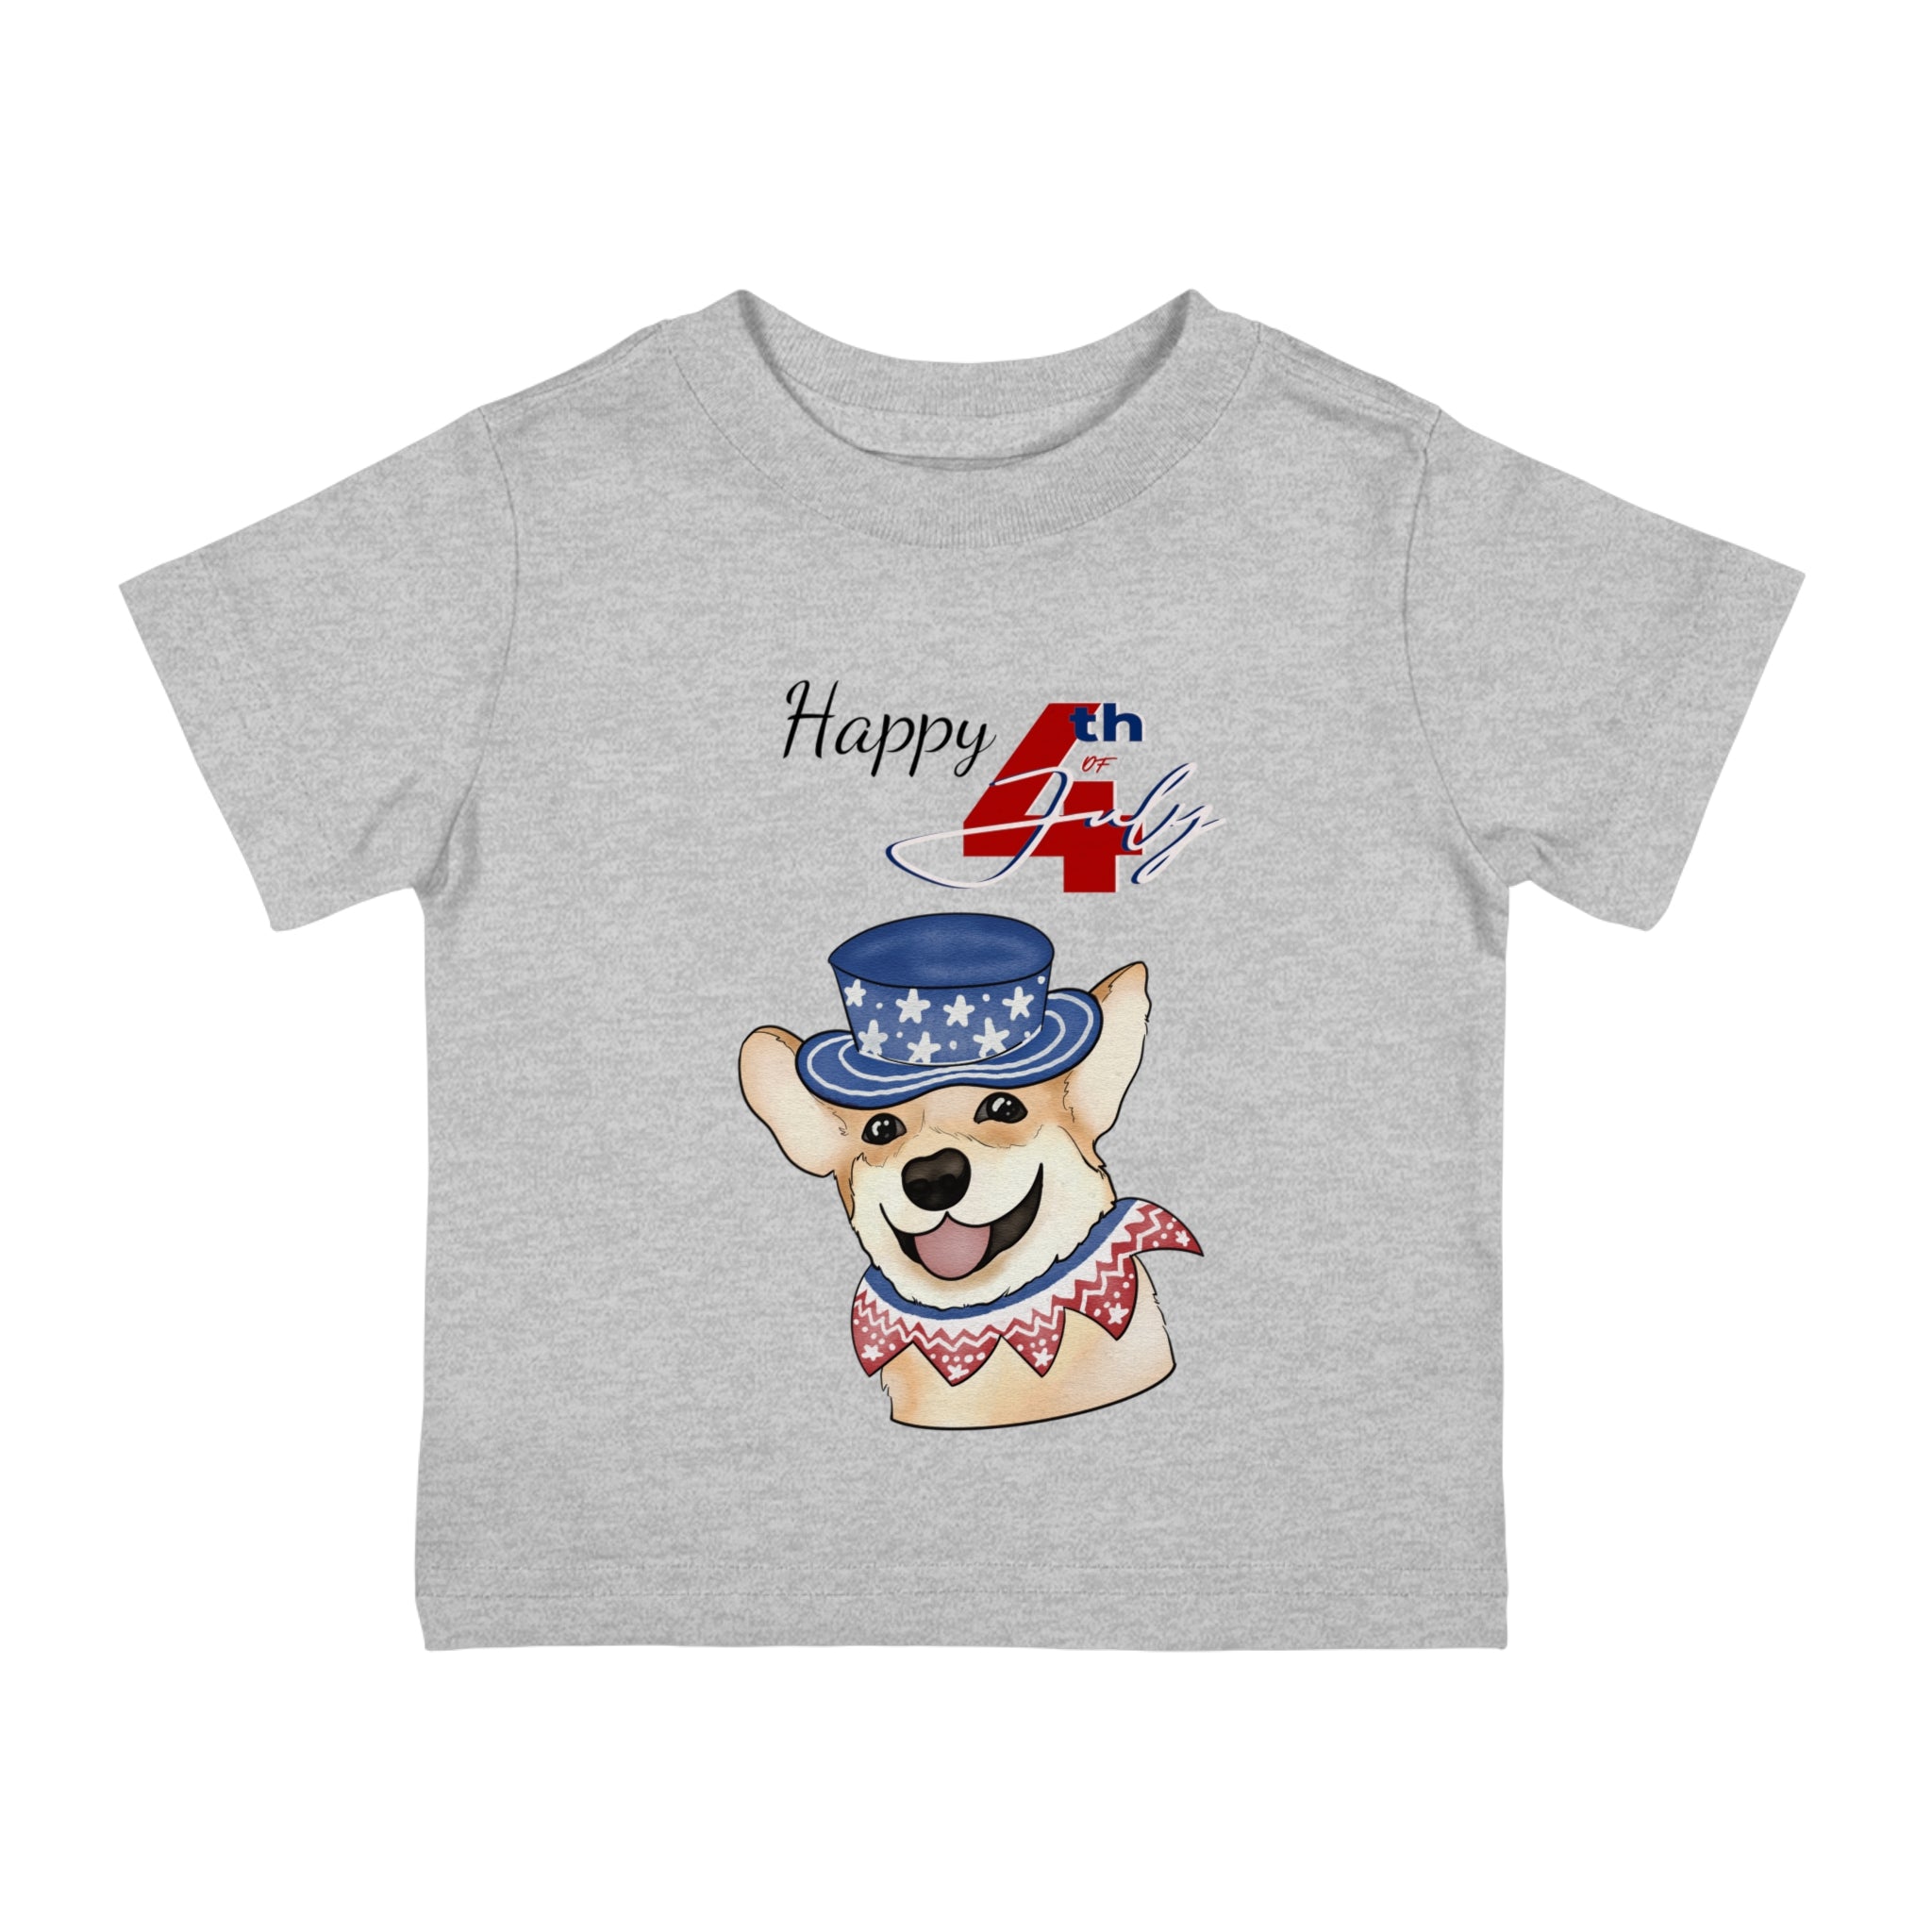 Happy 4th of July Happy Dog Infant Shirt, Baby Tee, Infant Tee